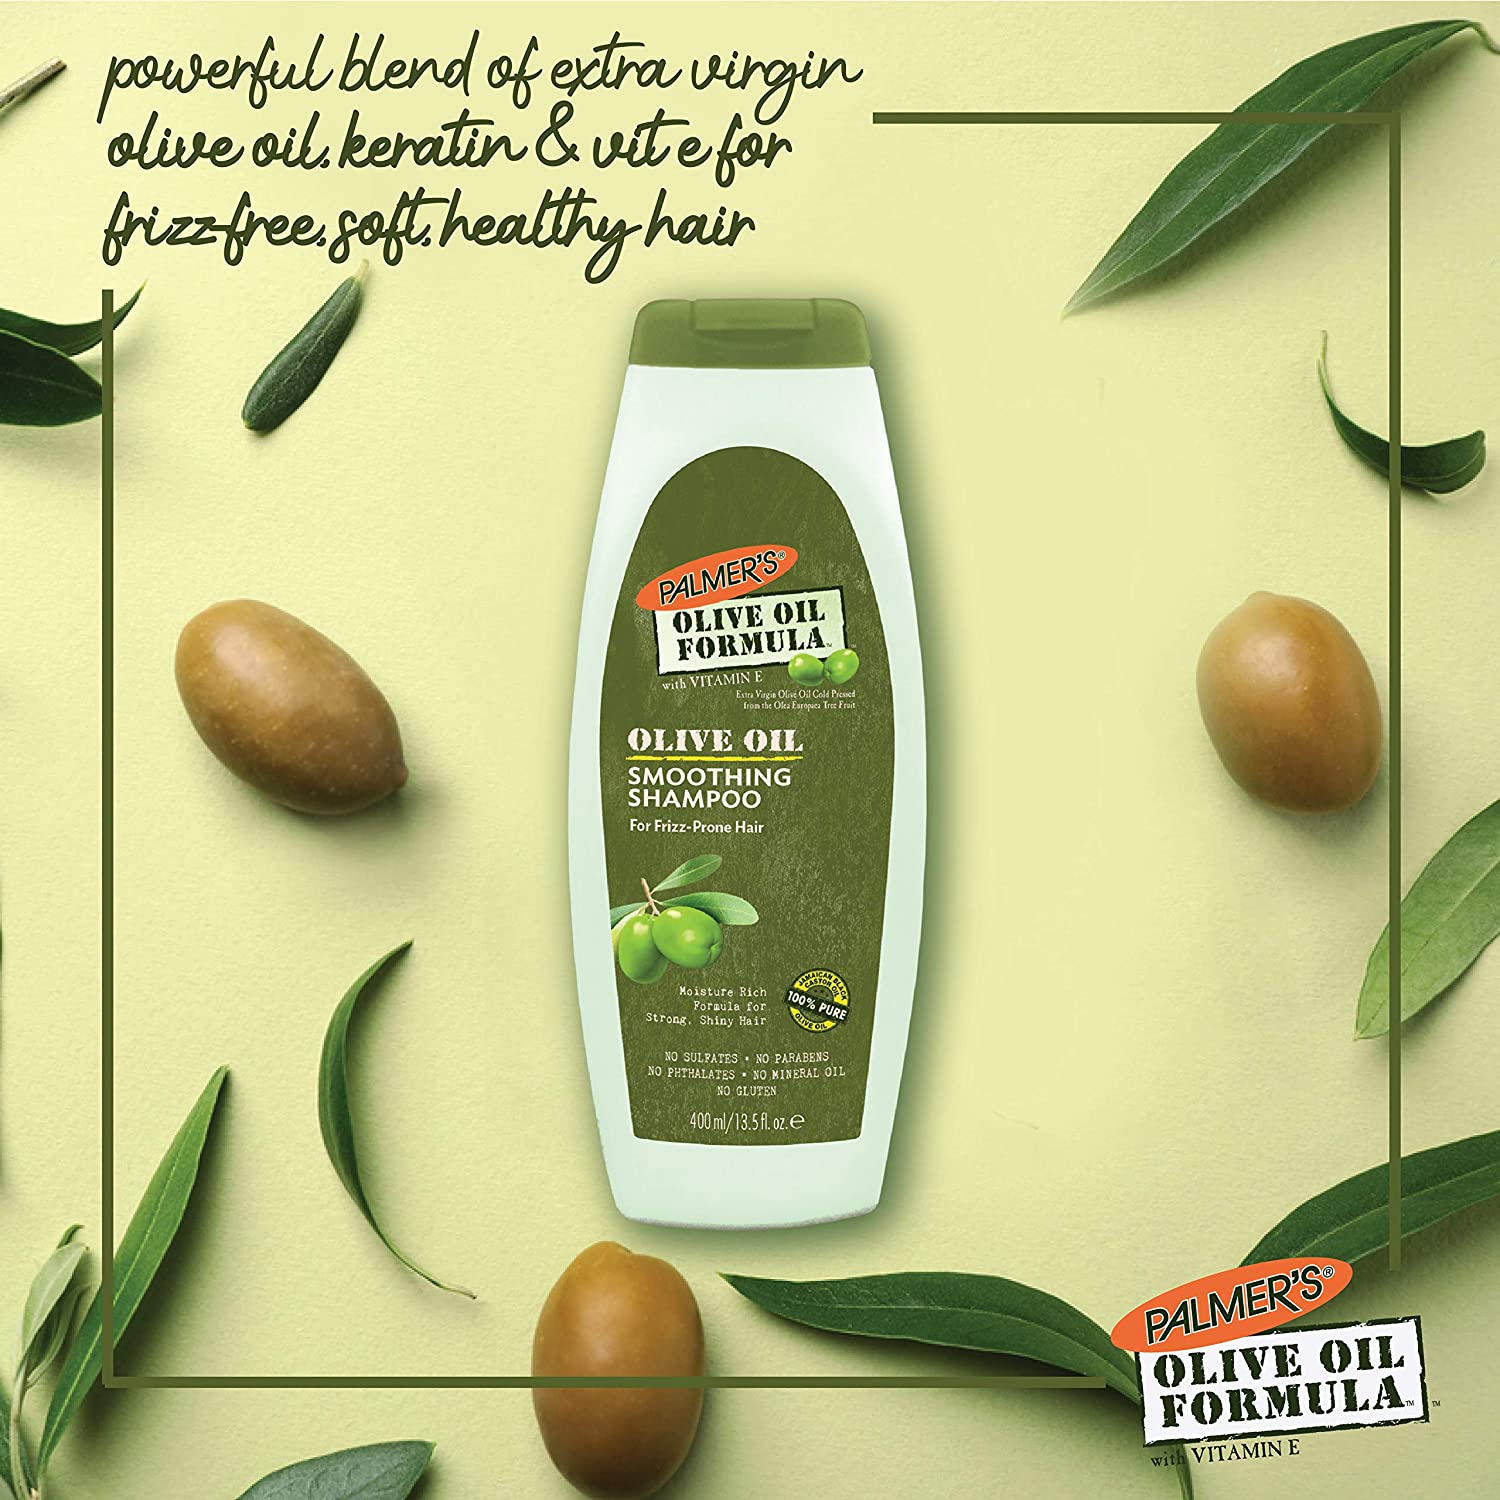 Palmer's Olive Oil Formula Smoothing Shampoo for Frizz-Prone Hair, 400ml